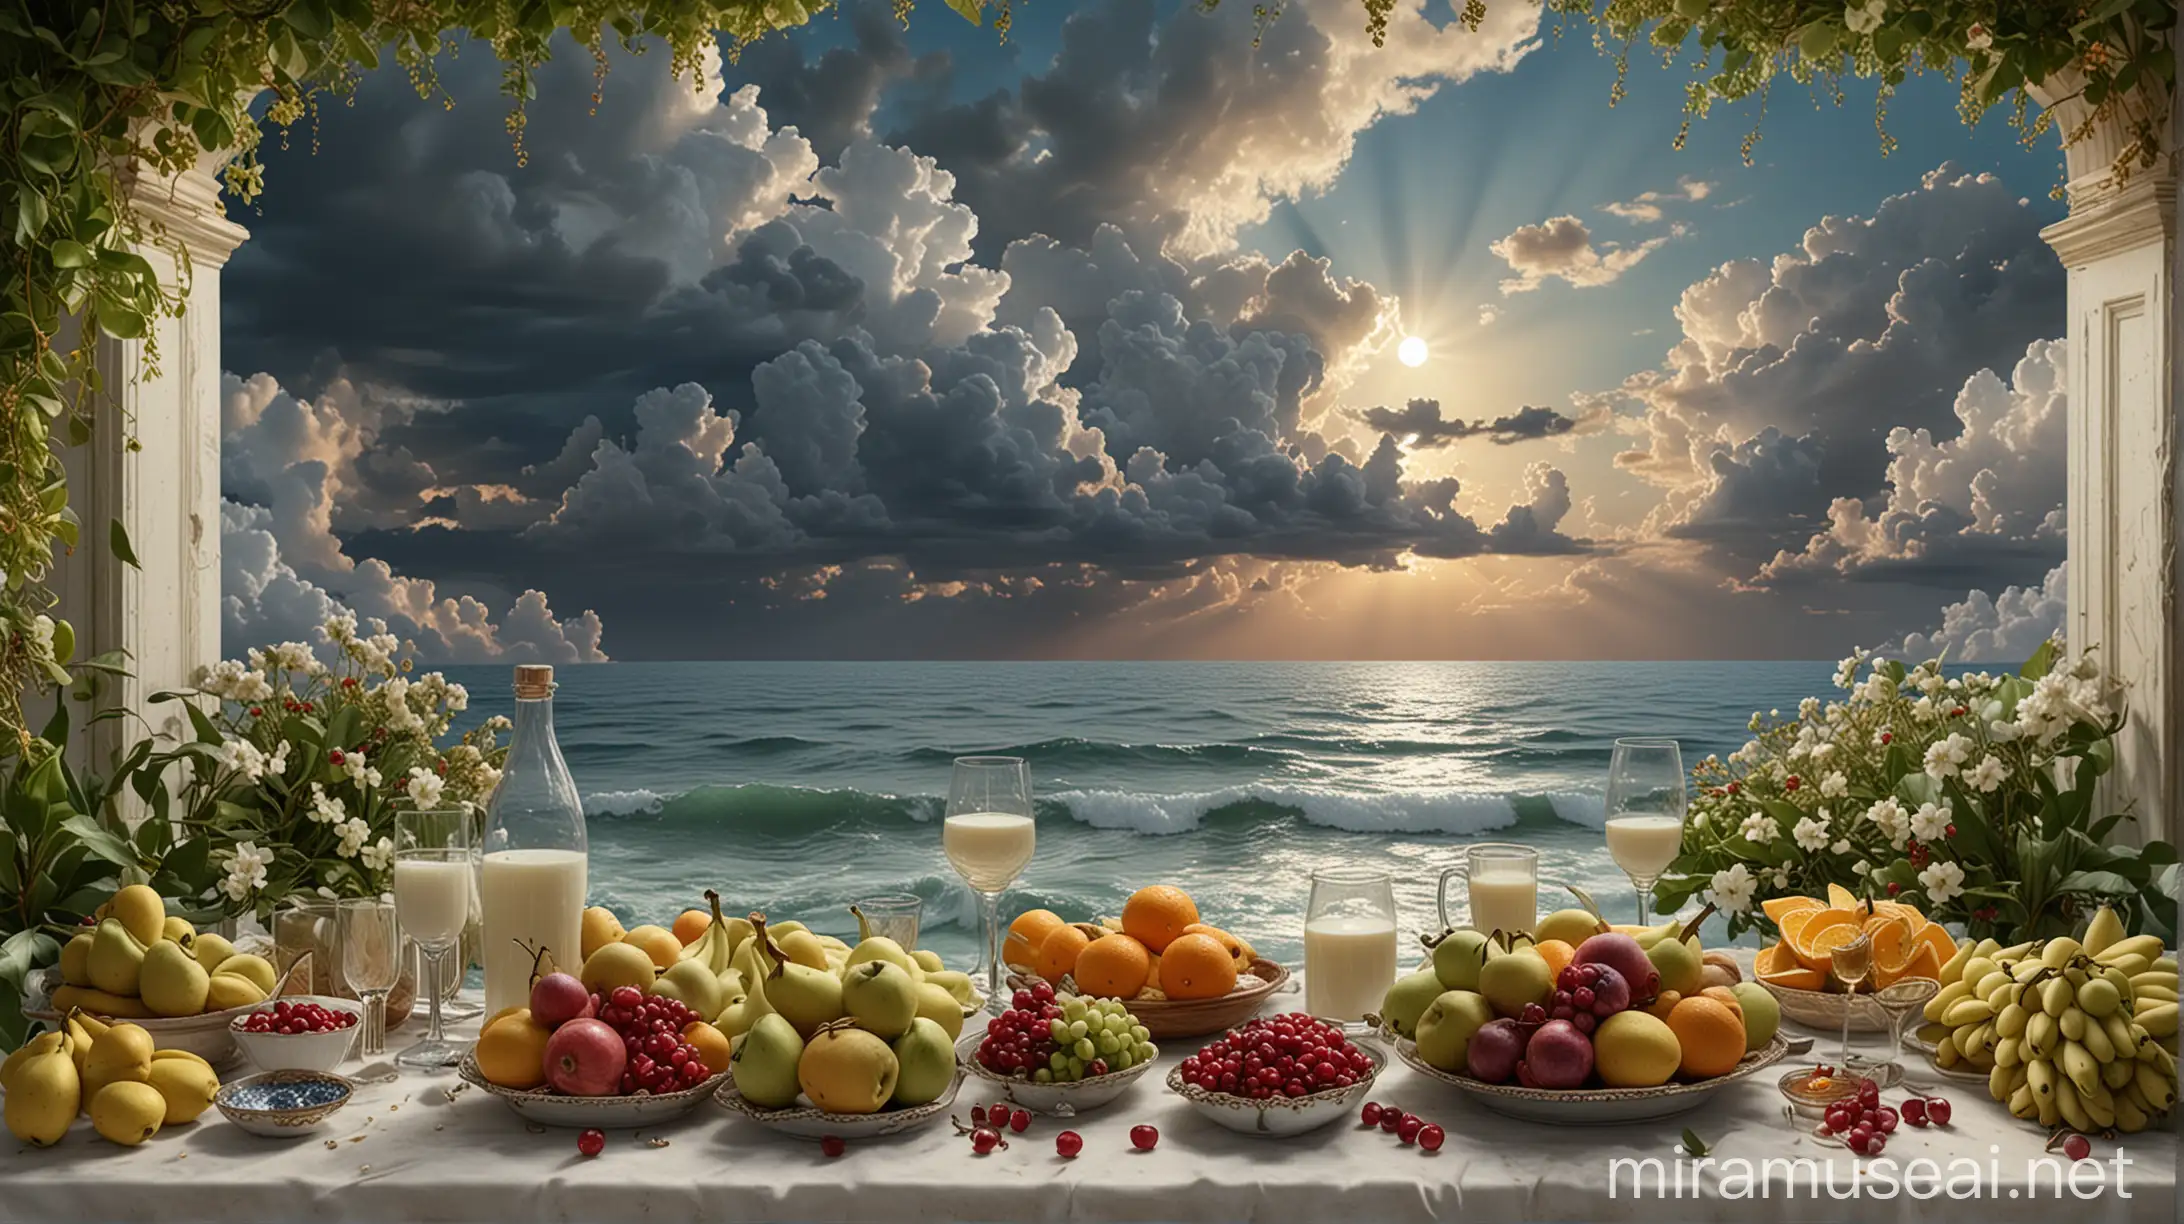 Heavenly Coastal Sunset with Fruits and Palaces of Pearls and Gold